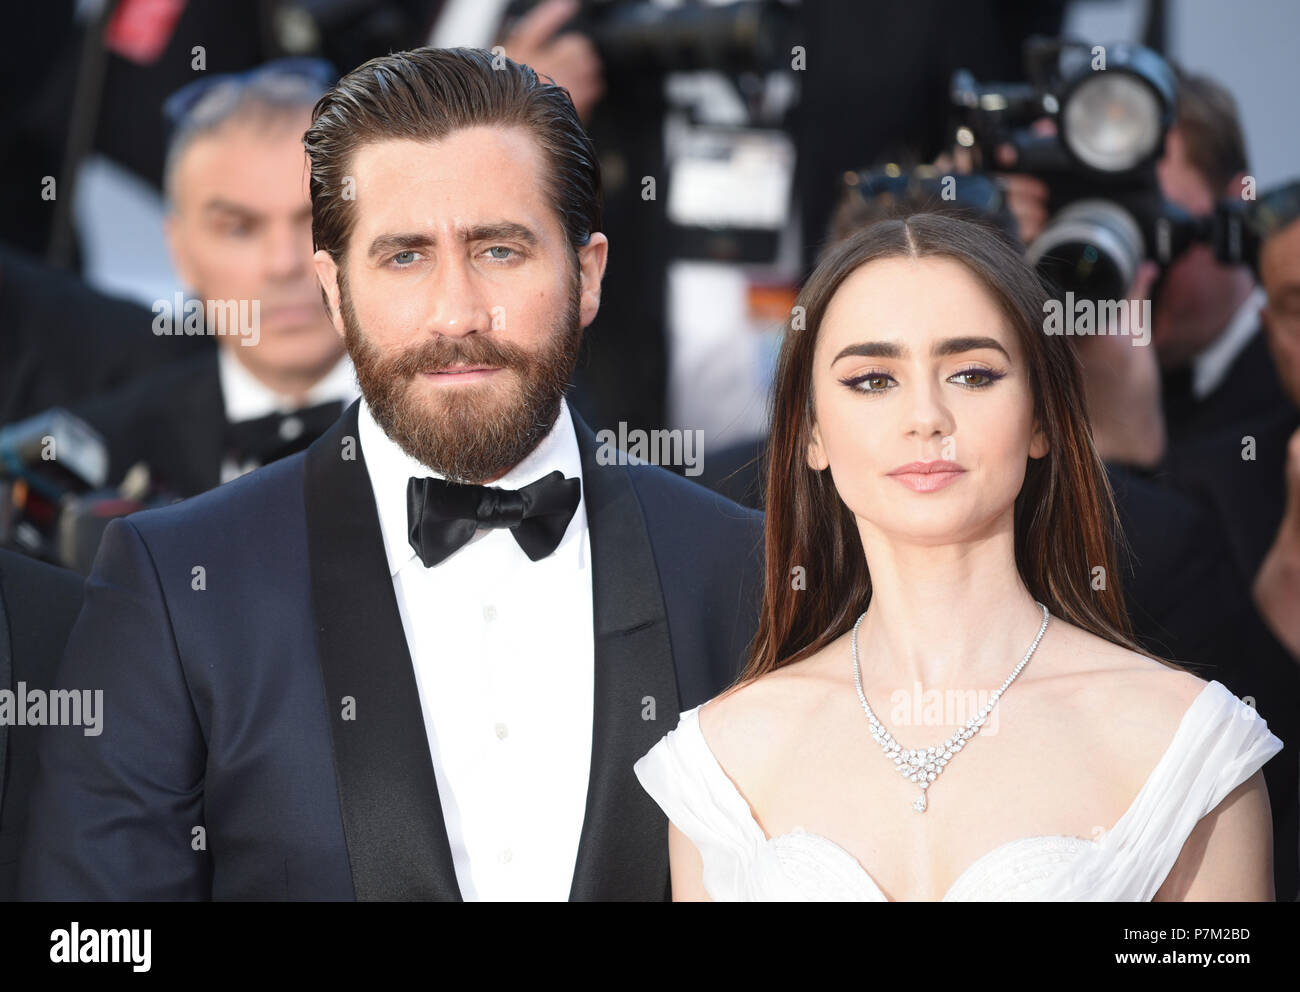 May 19, 2017 - Cannes, France: Jake Gyllenhaal and Lily Collins ...